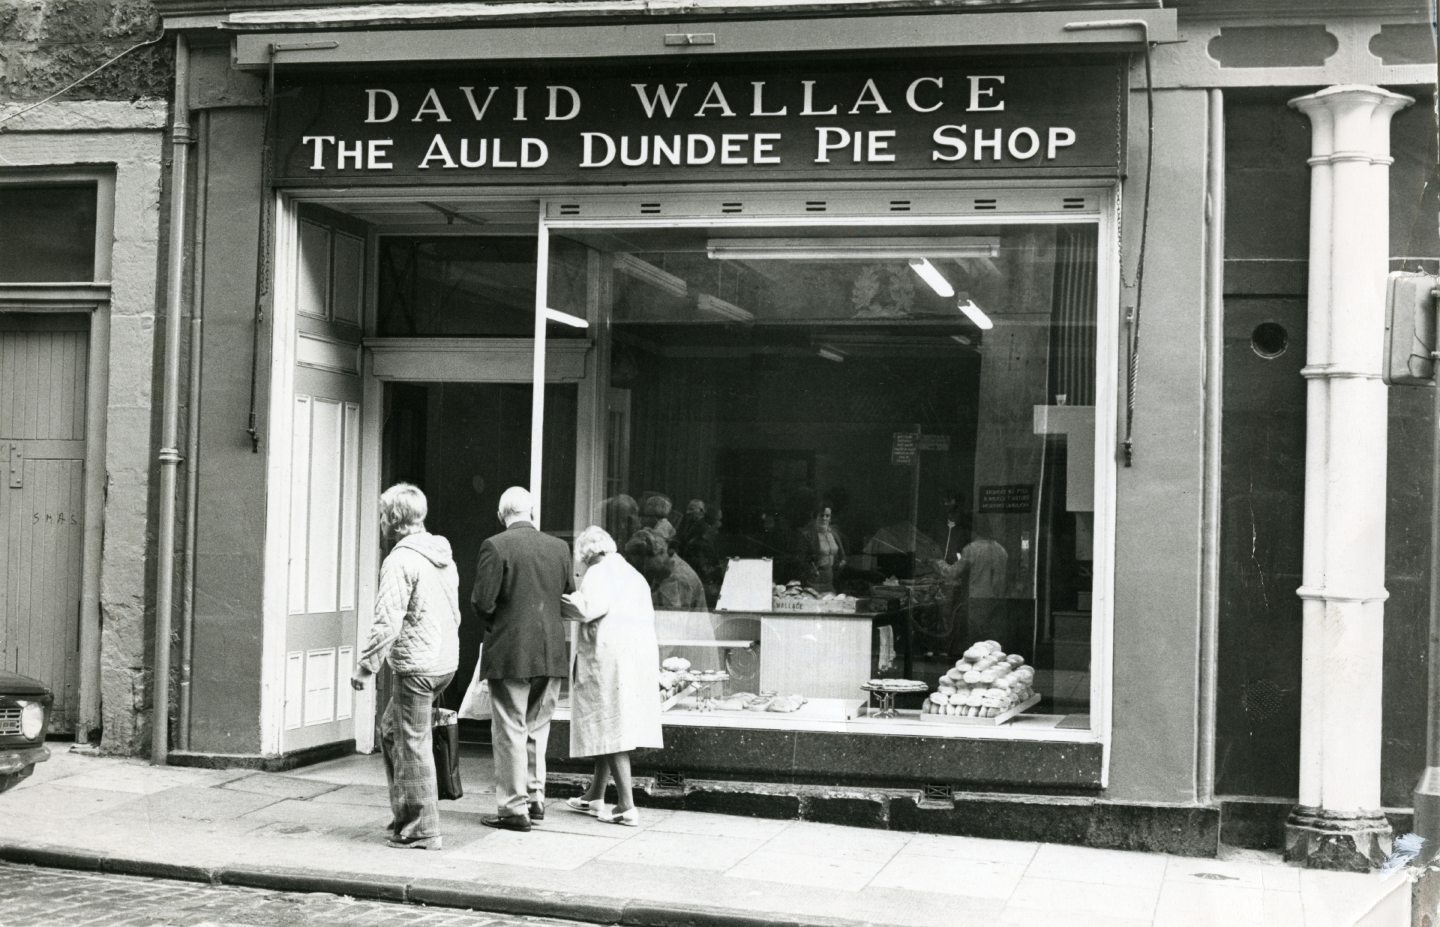 The Auld Pie Shop finally closed in August 1977.